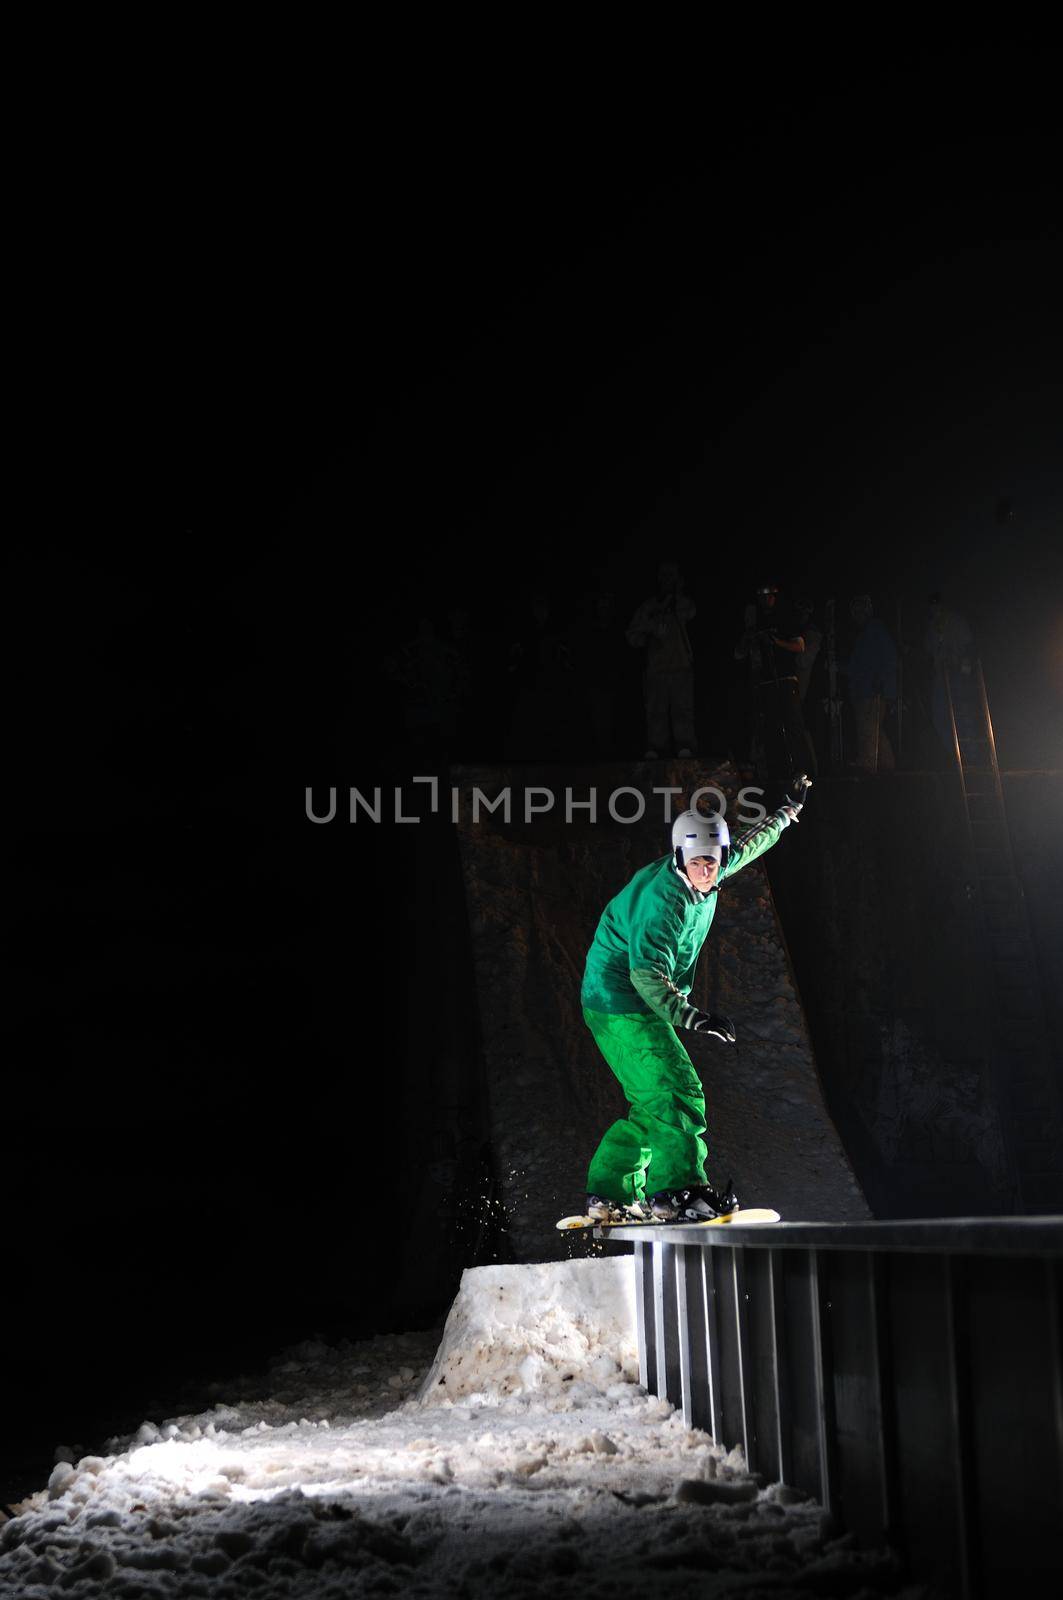 freestyle snowboarder jump in air at night by dotshock